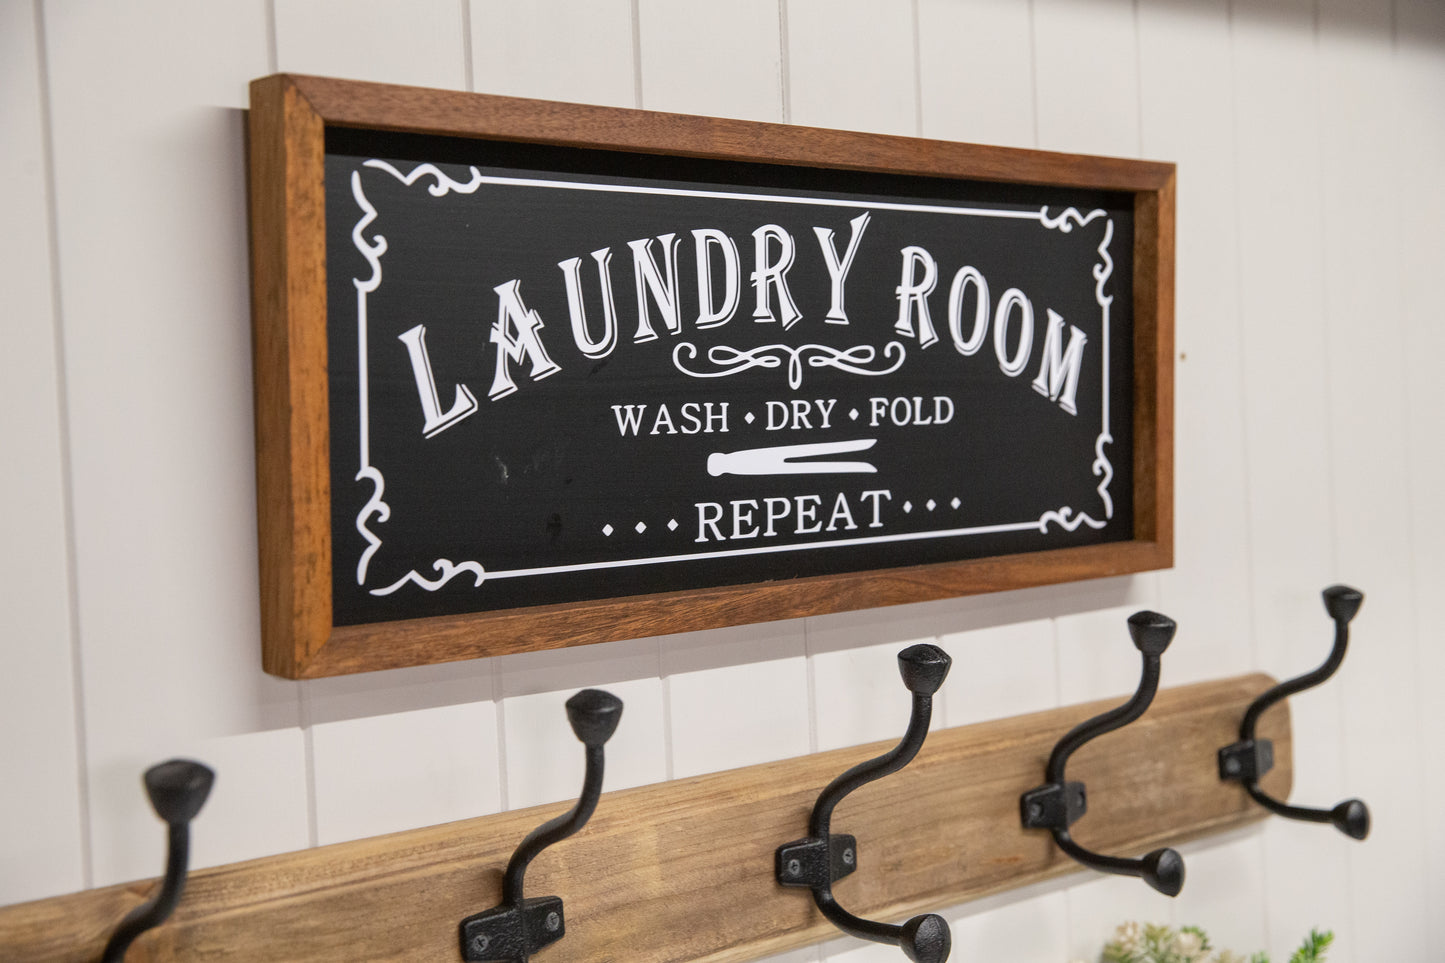 Laundry Room Wash Dry Fold Repeat